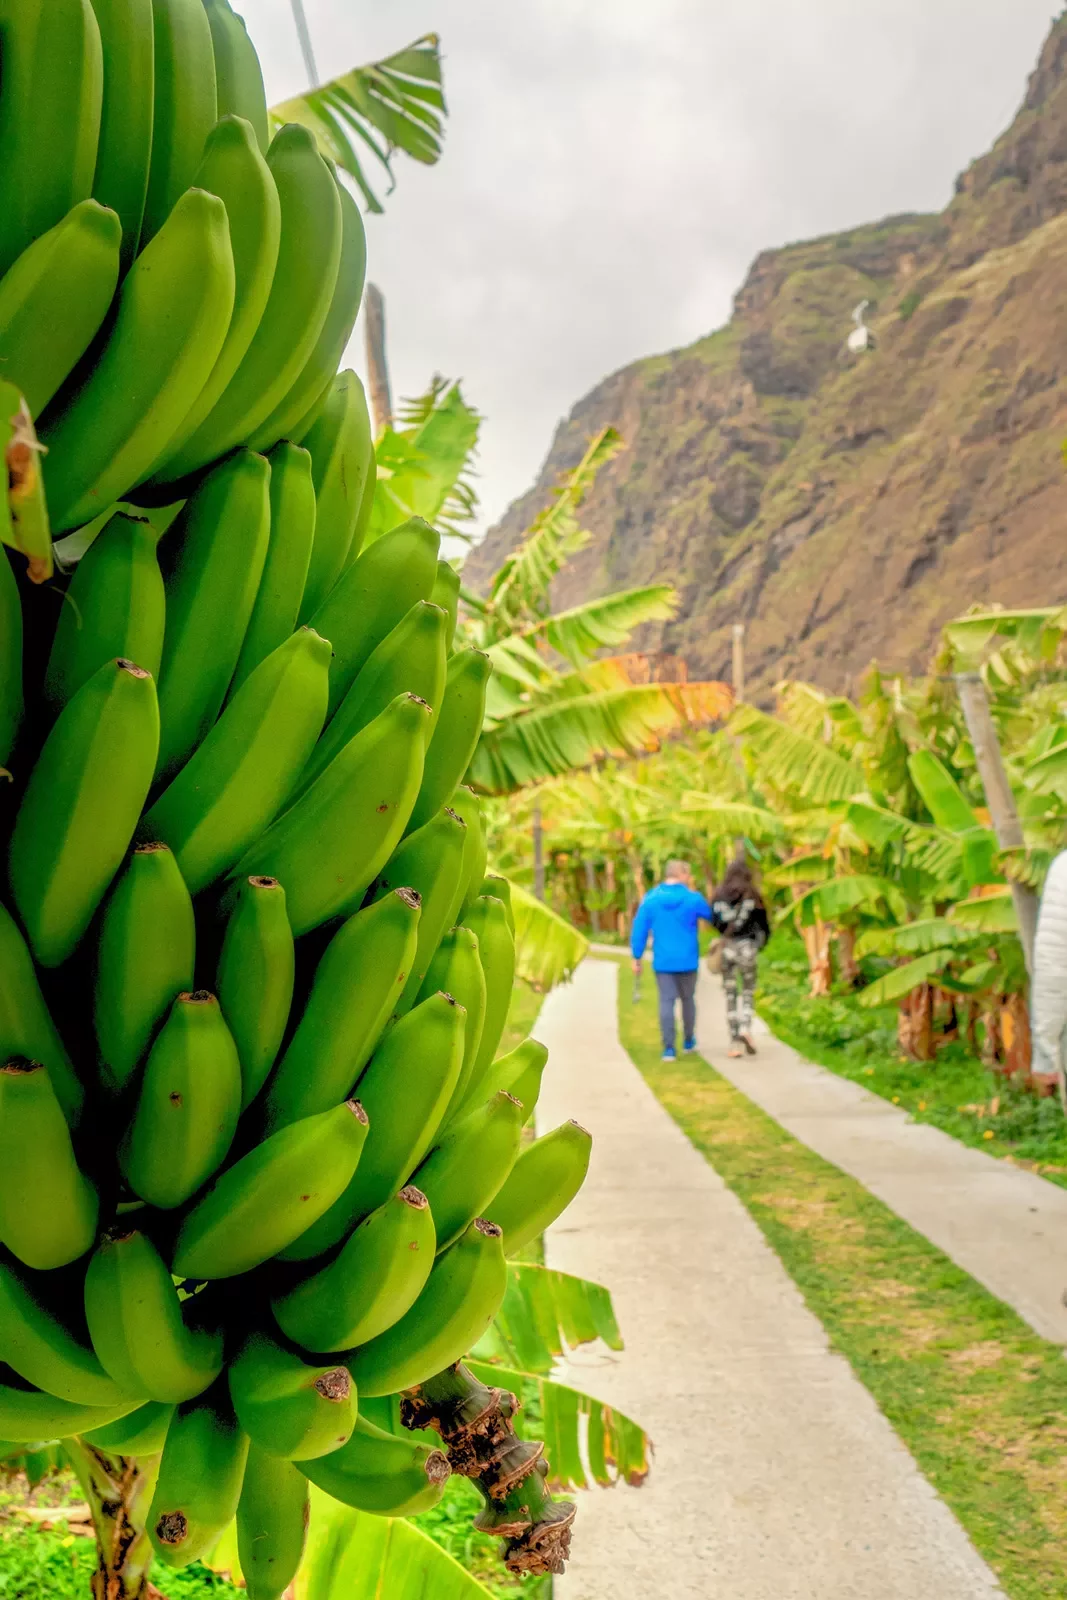 Green plantains with two people walking away in the distance